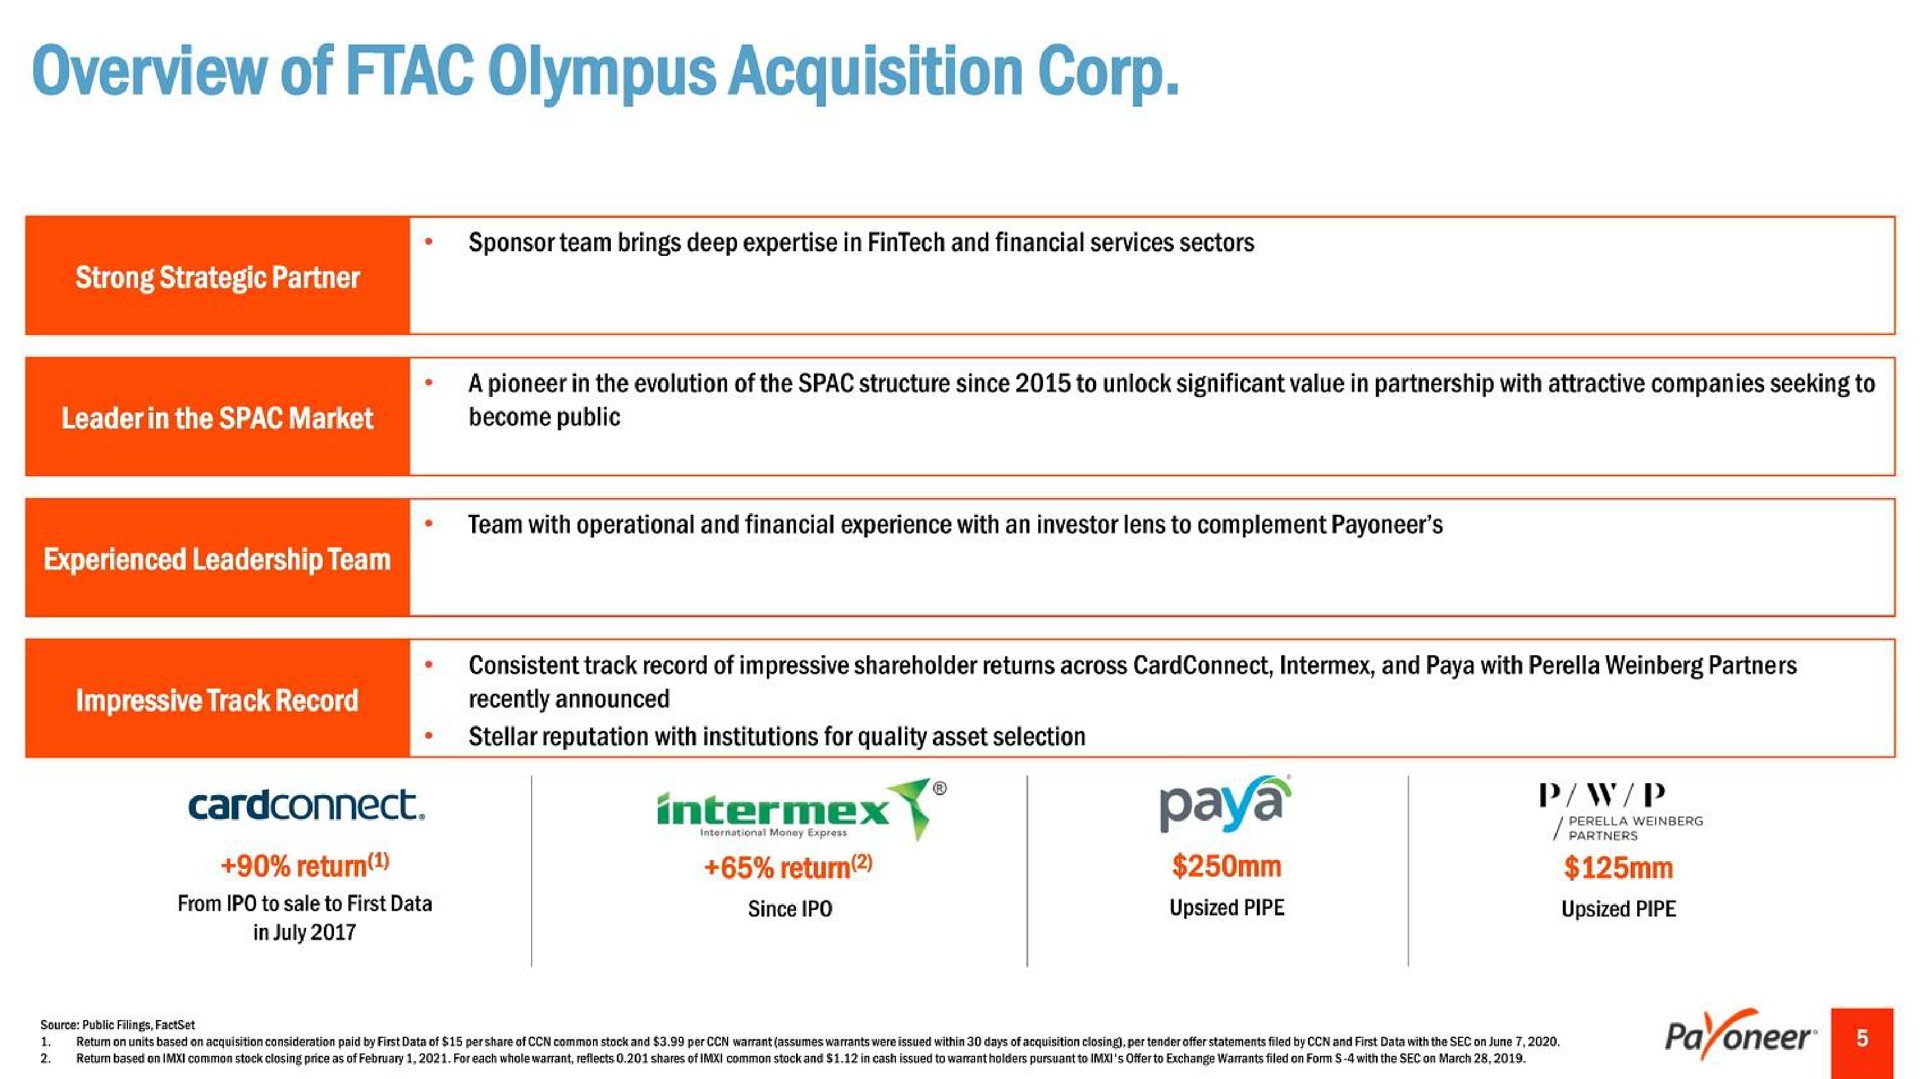 overview of acquisition corp | Payoneer